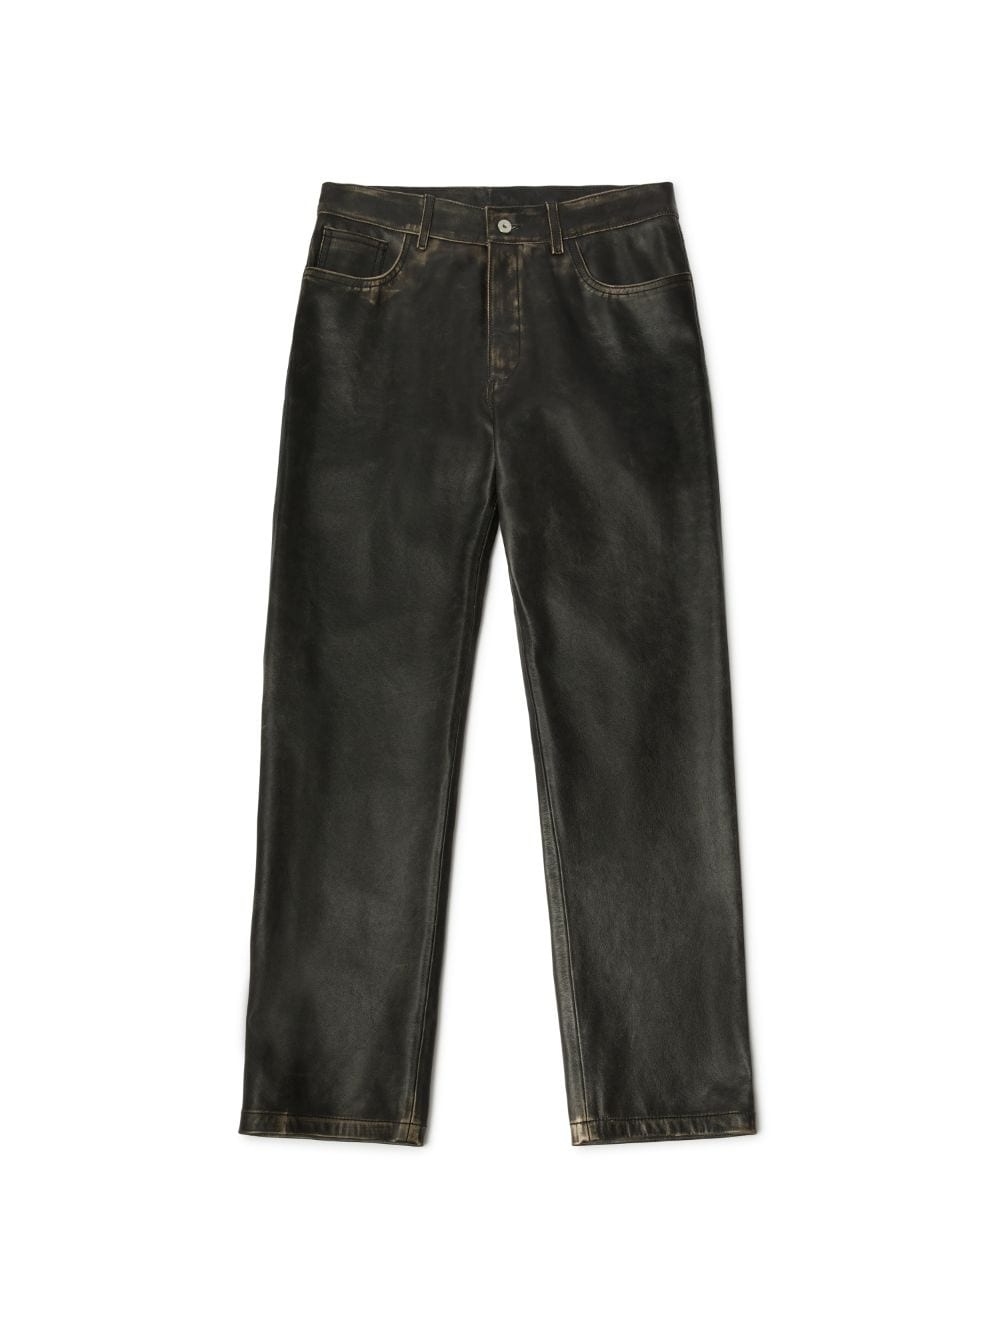 Distressed Leather Pants - 1